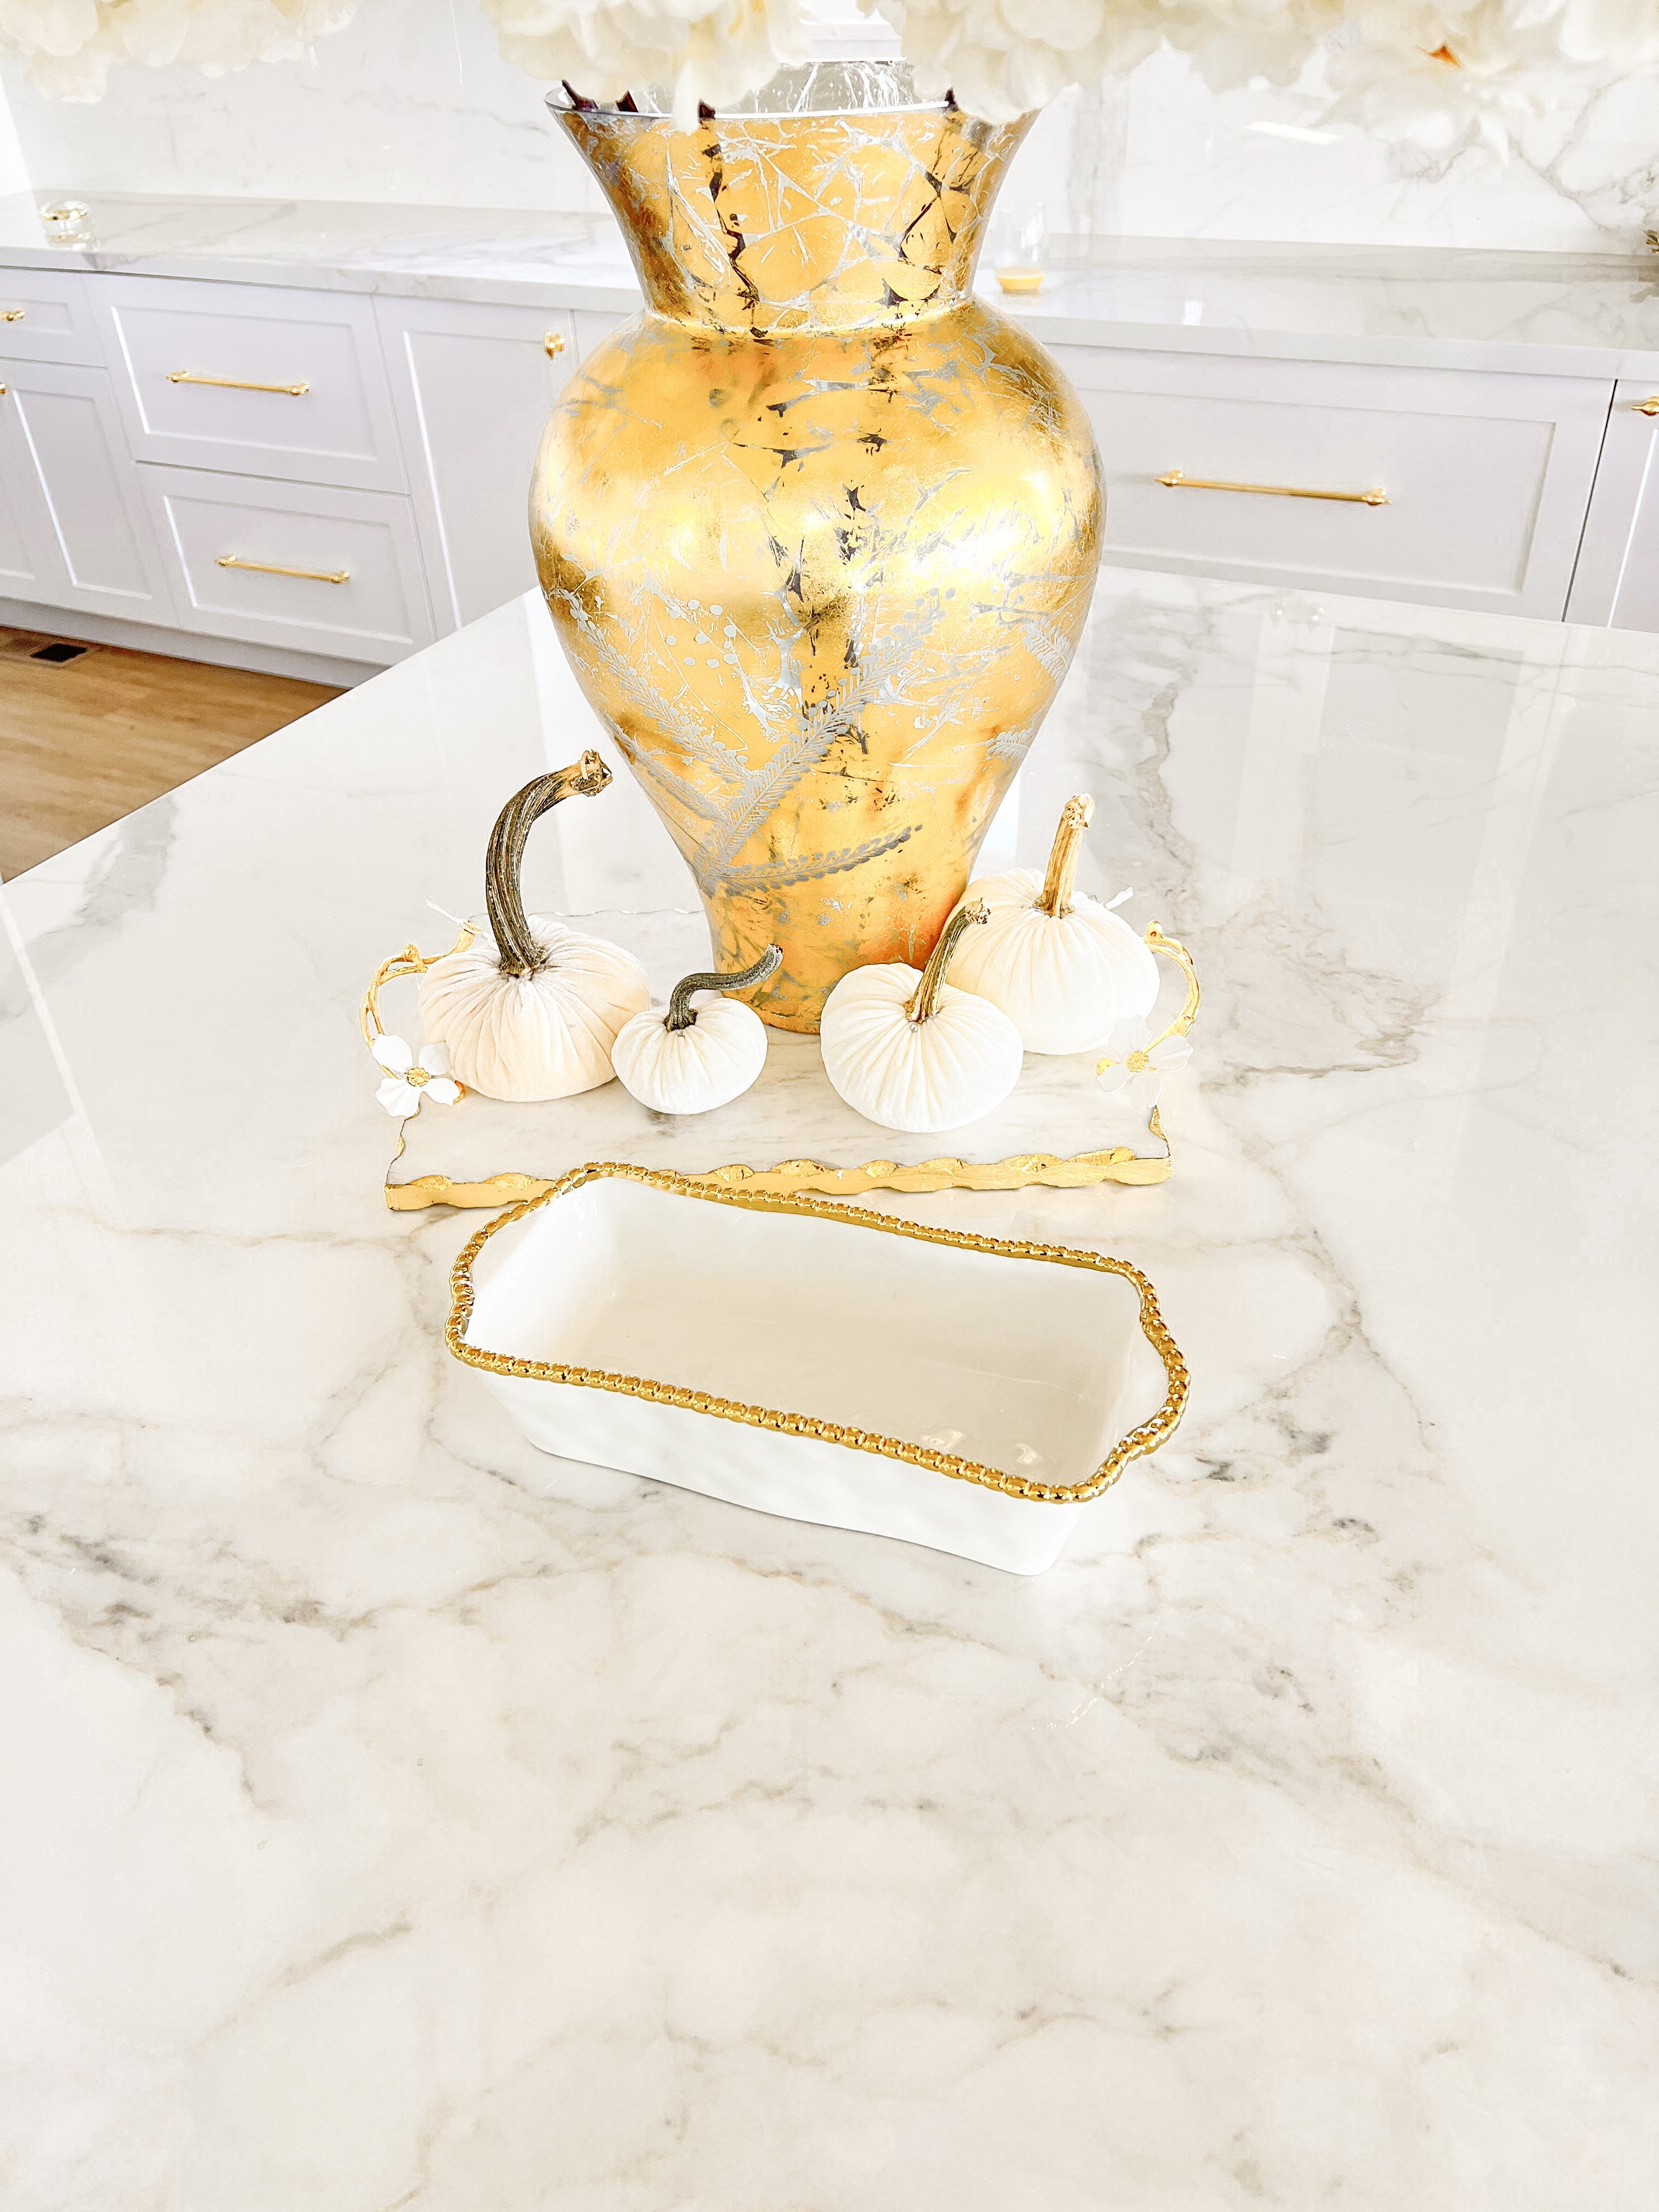 White and Gold Beaded Loaf Baking Dish - HTS HOME DECOR